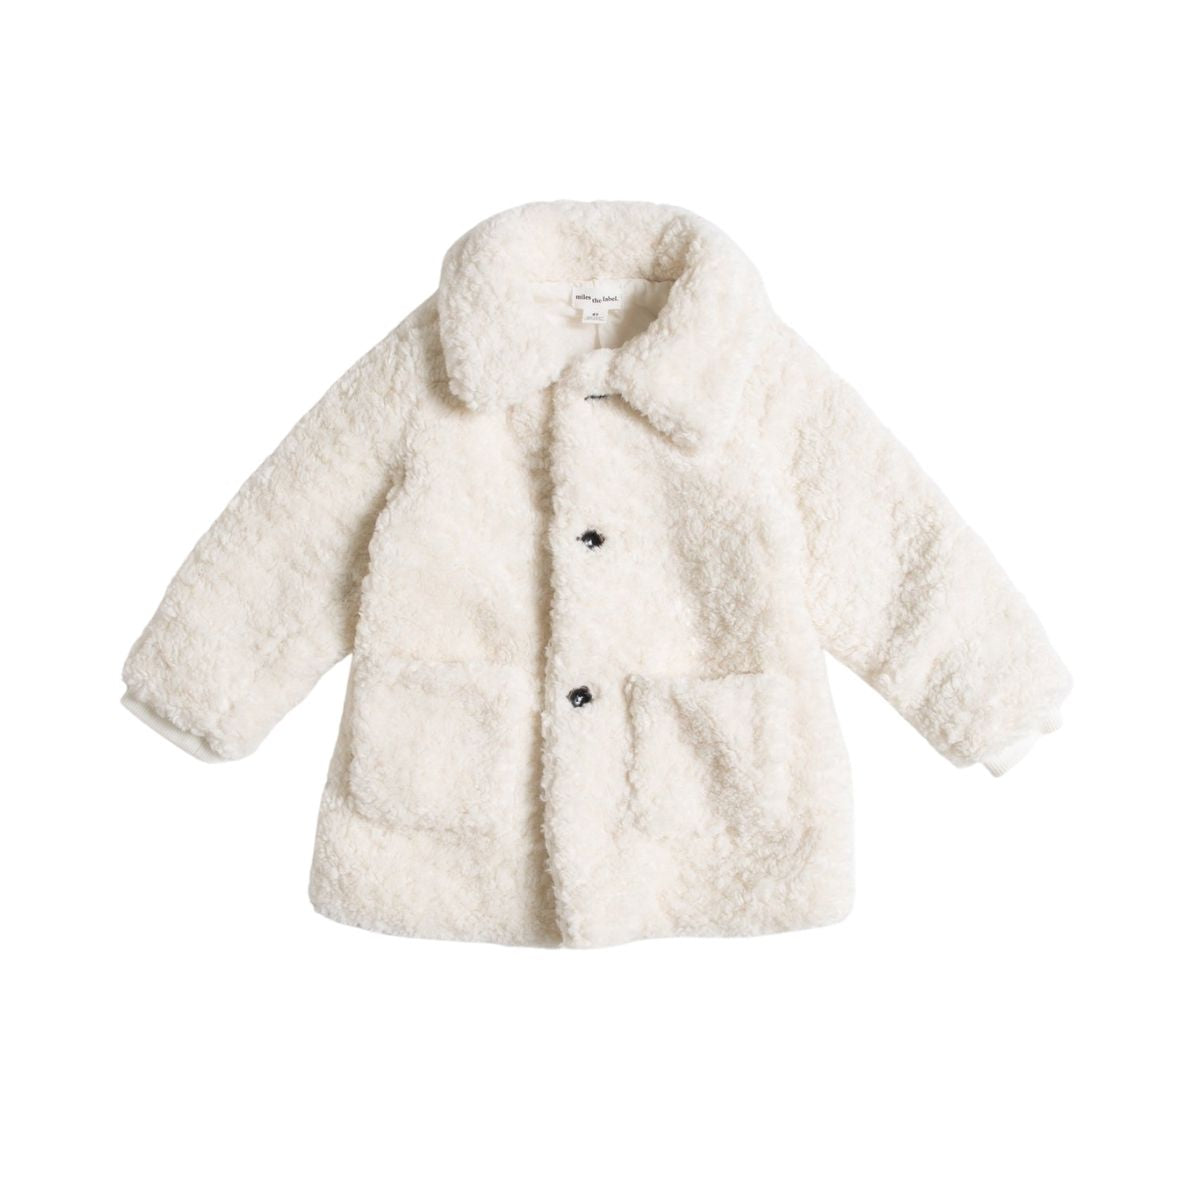 Sherpa Coat in Cream with Recycled Polyster